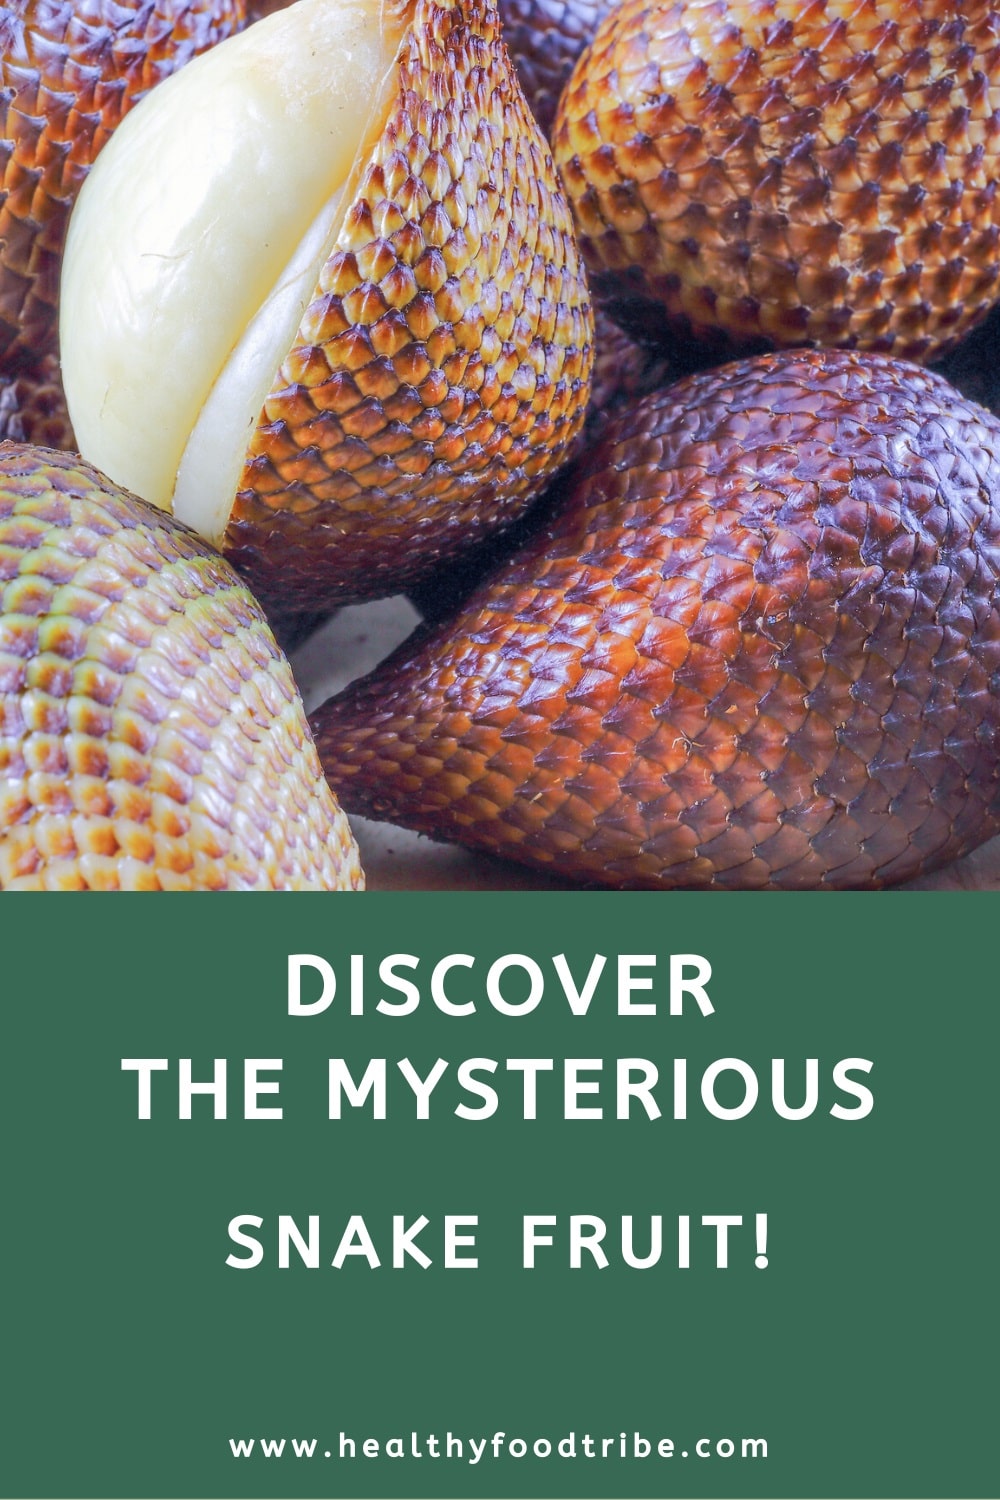 Discover the mysterious snake fruit